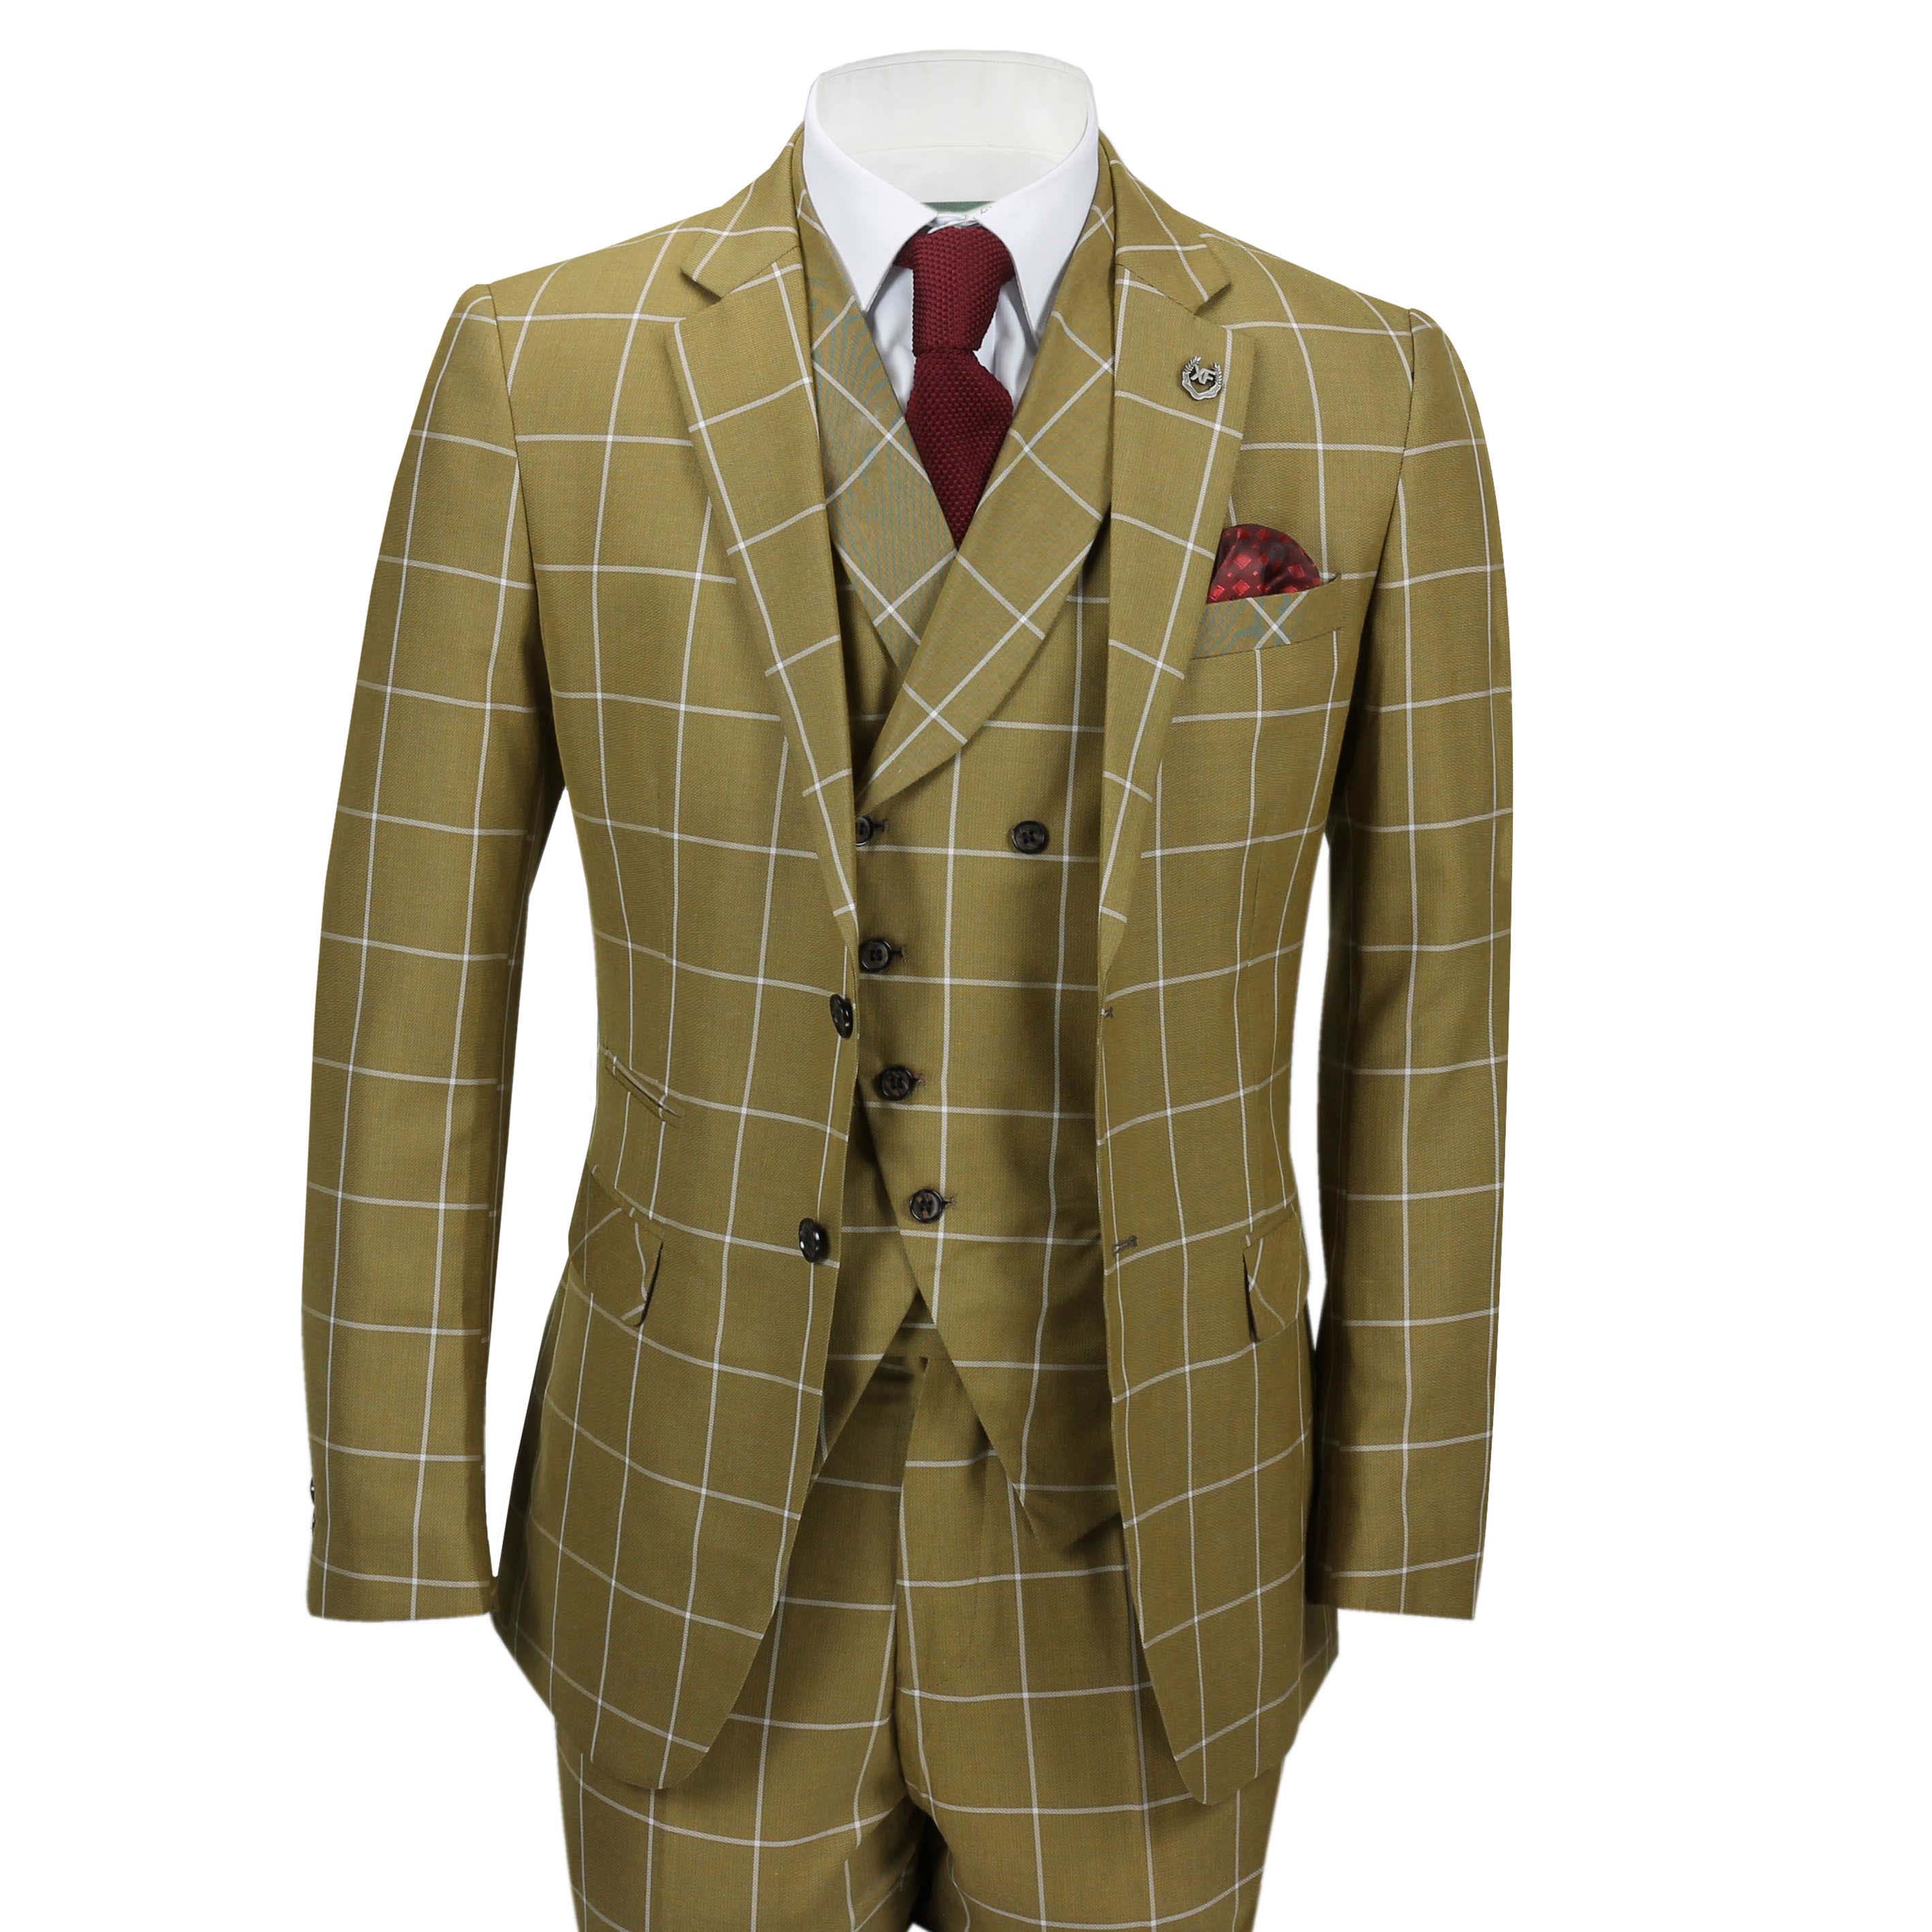 New Mens Classic 3 Piece Suit White Bold Check on Tan Retro Vintage ...